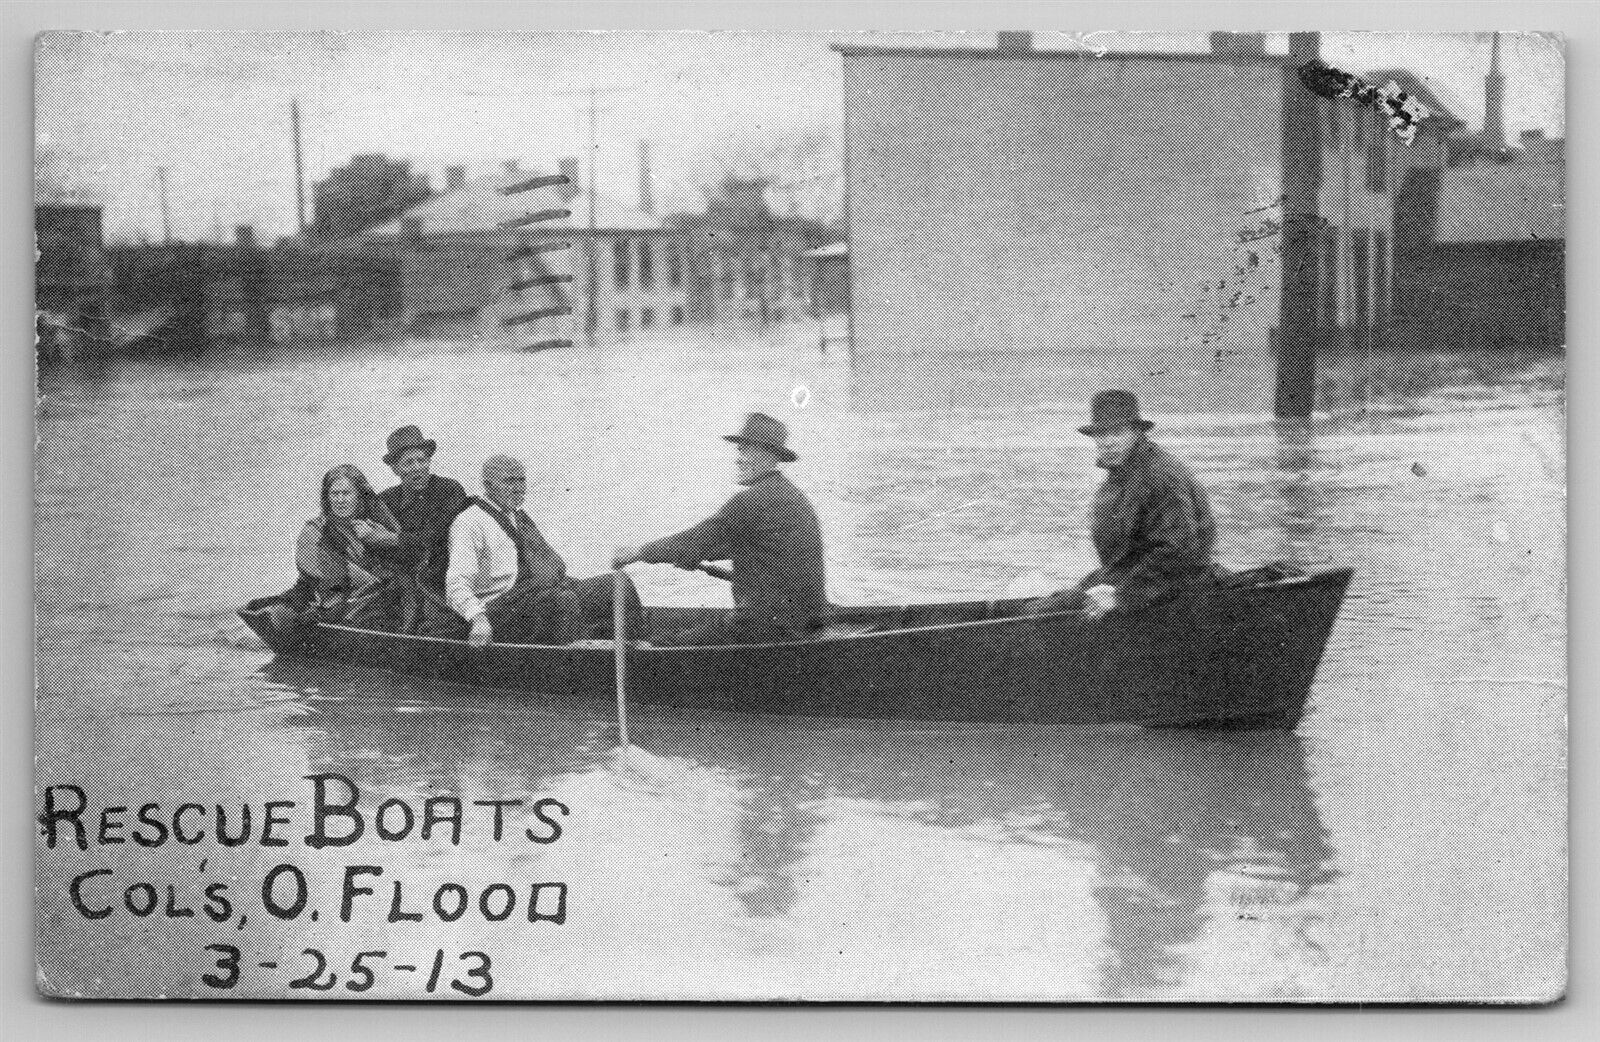 Flood Columbus OH 1913 Rescue Boats Rowboat Chest Deep Water Postcard G1